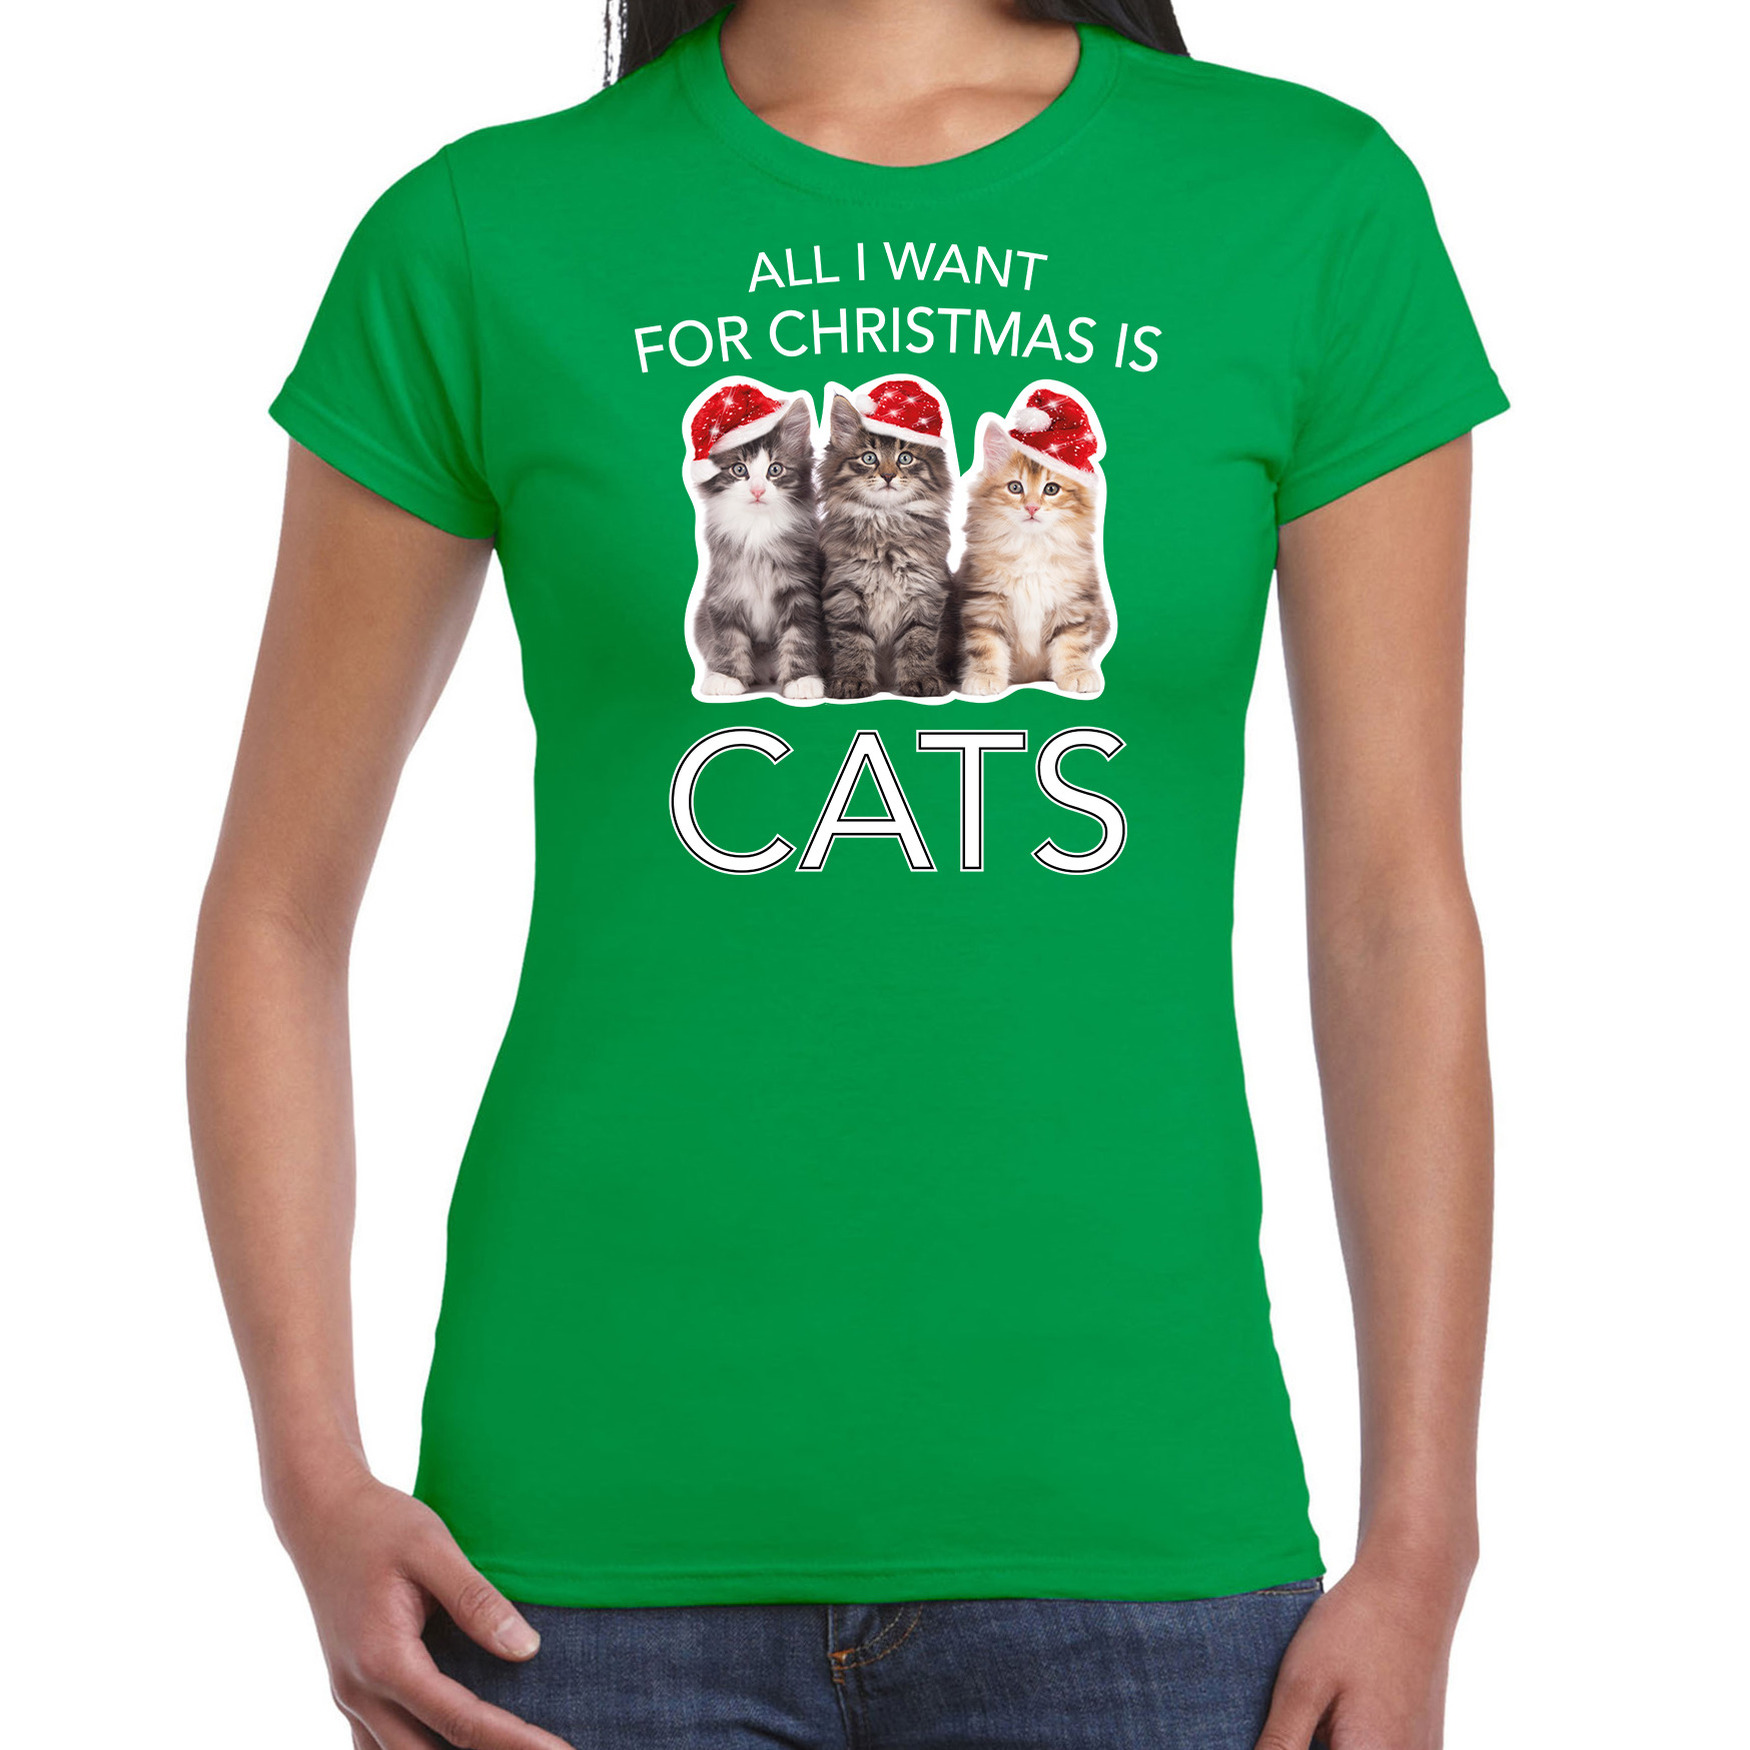 Groen Kerstshirt-Kerstkleding All i want for christmas is cats voor dames